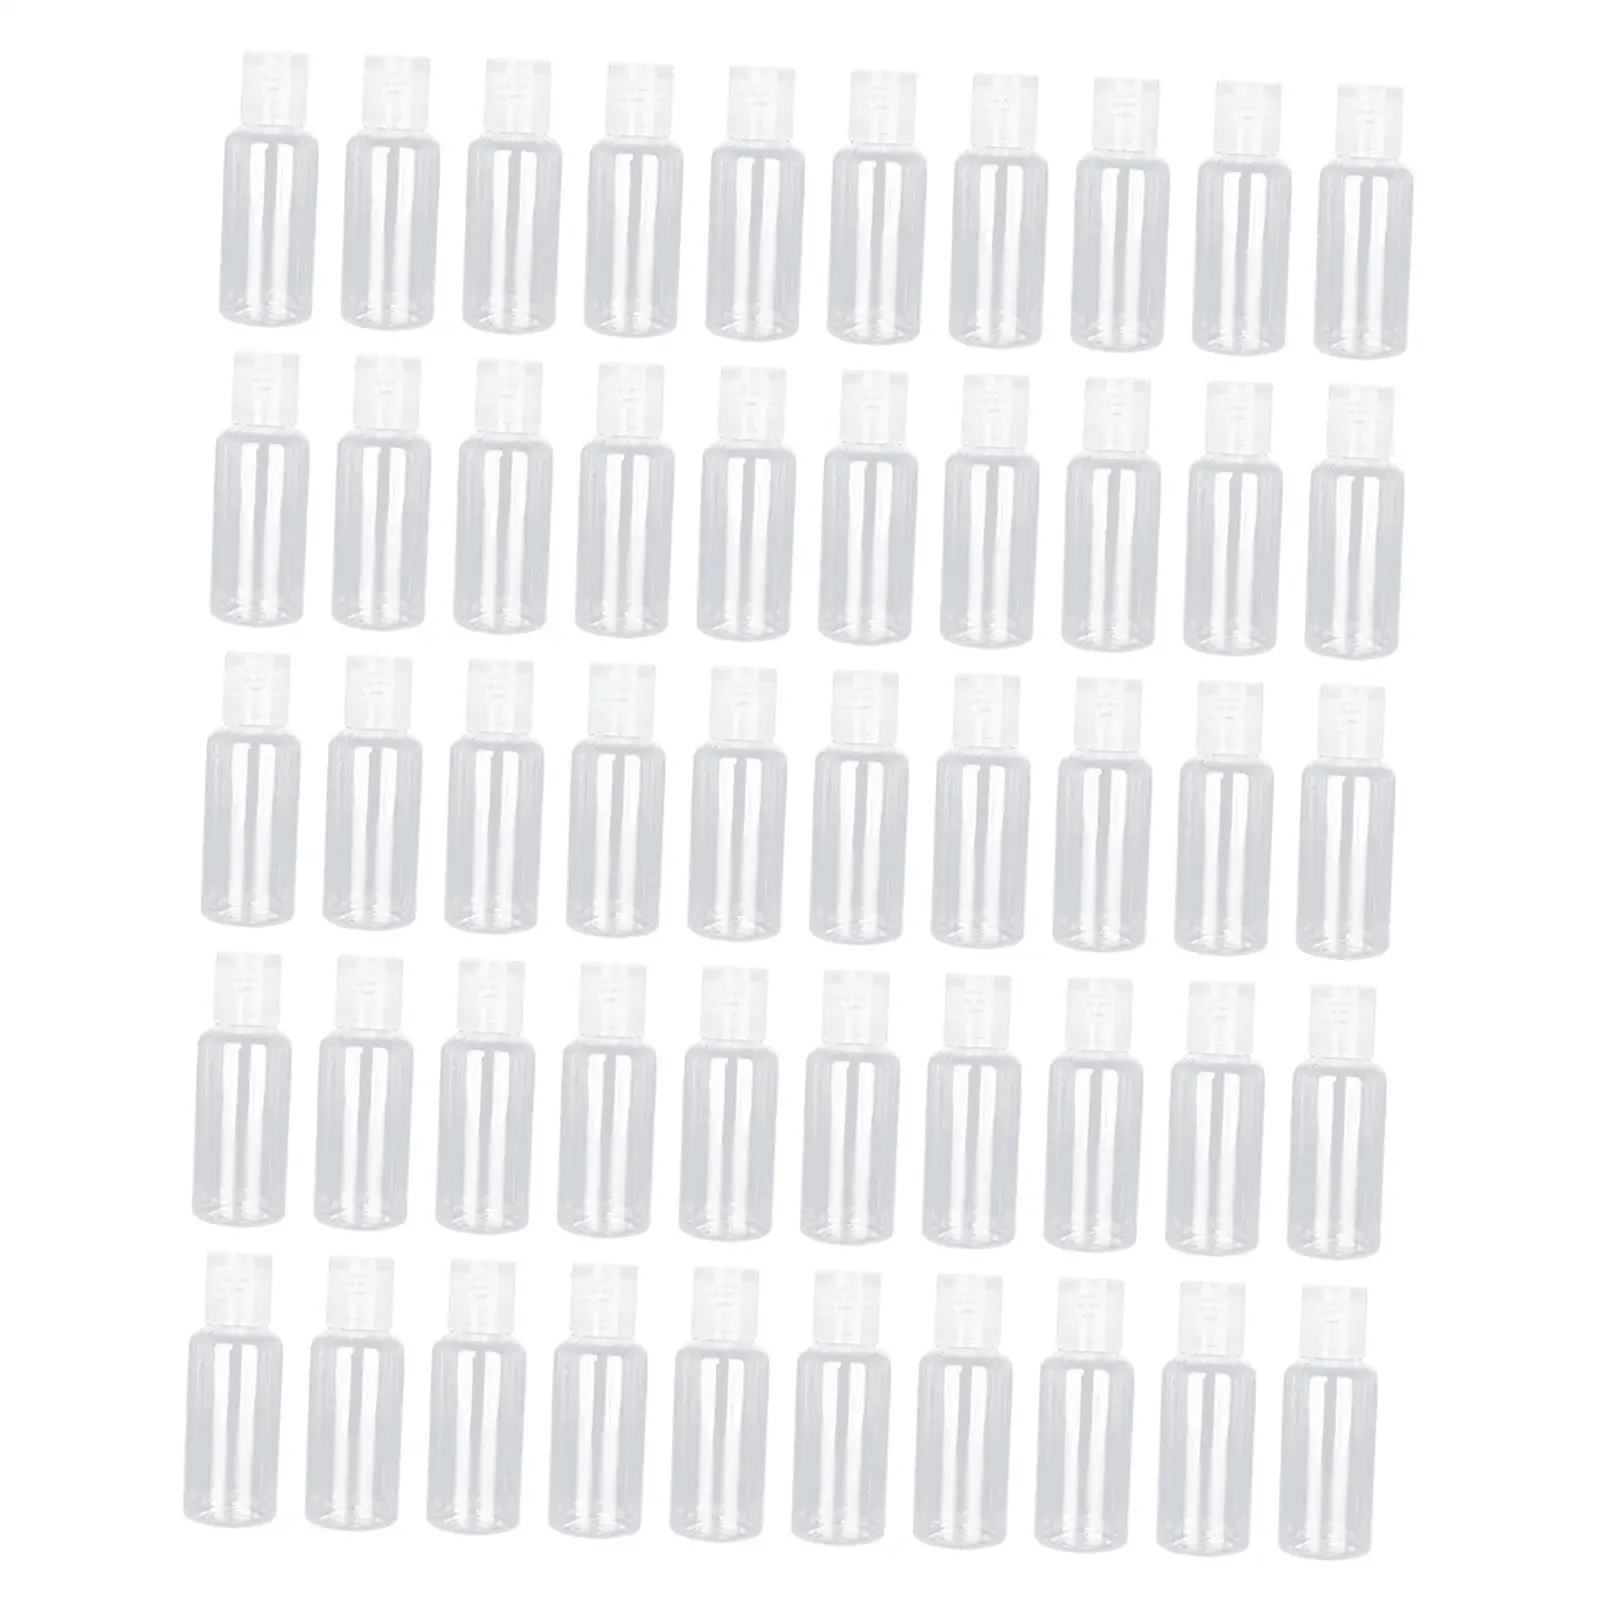 50x Cosmetic Bottle Leakproof Travel Size Empty with Lid Refillable Bottles